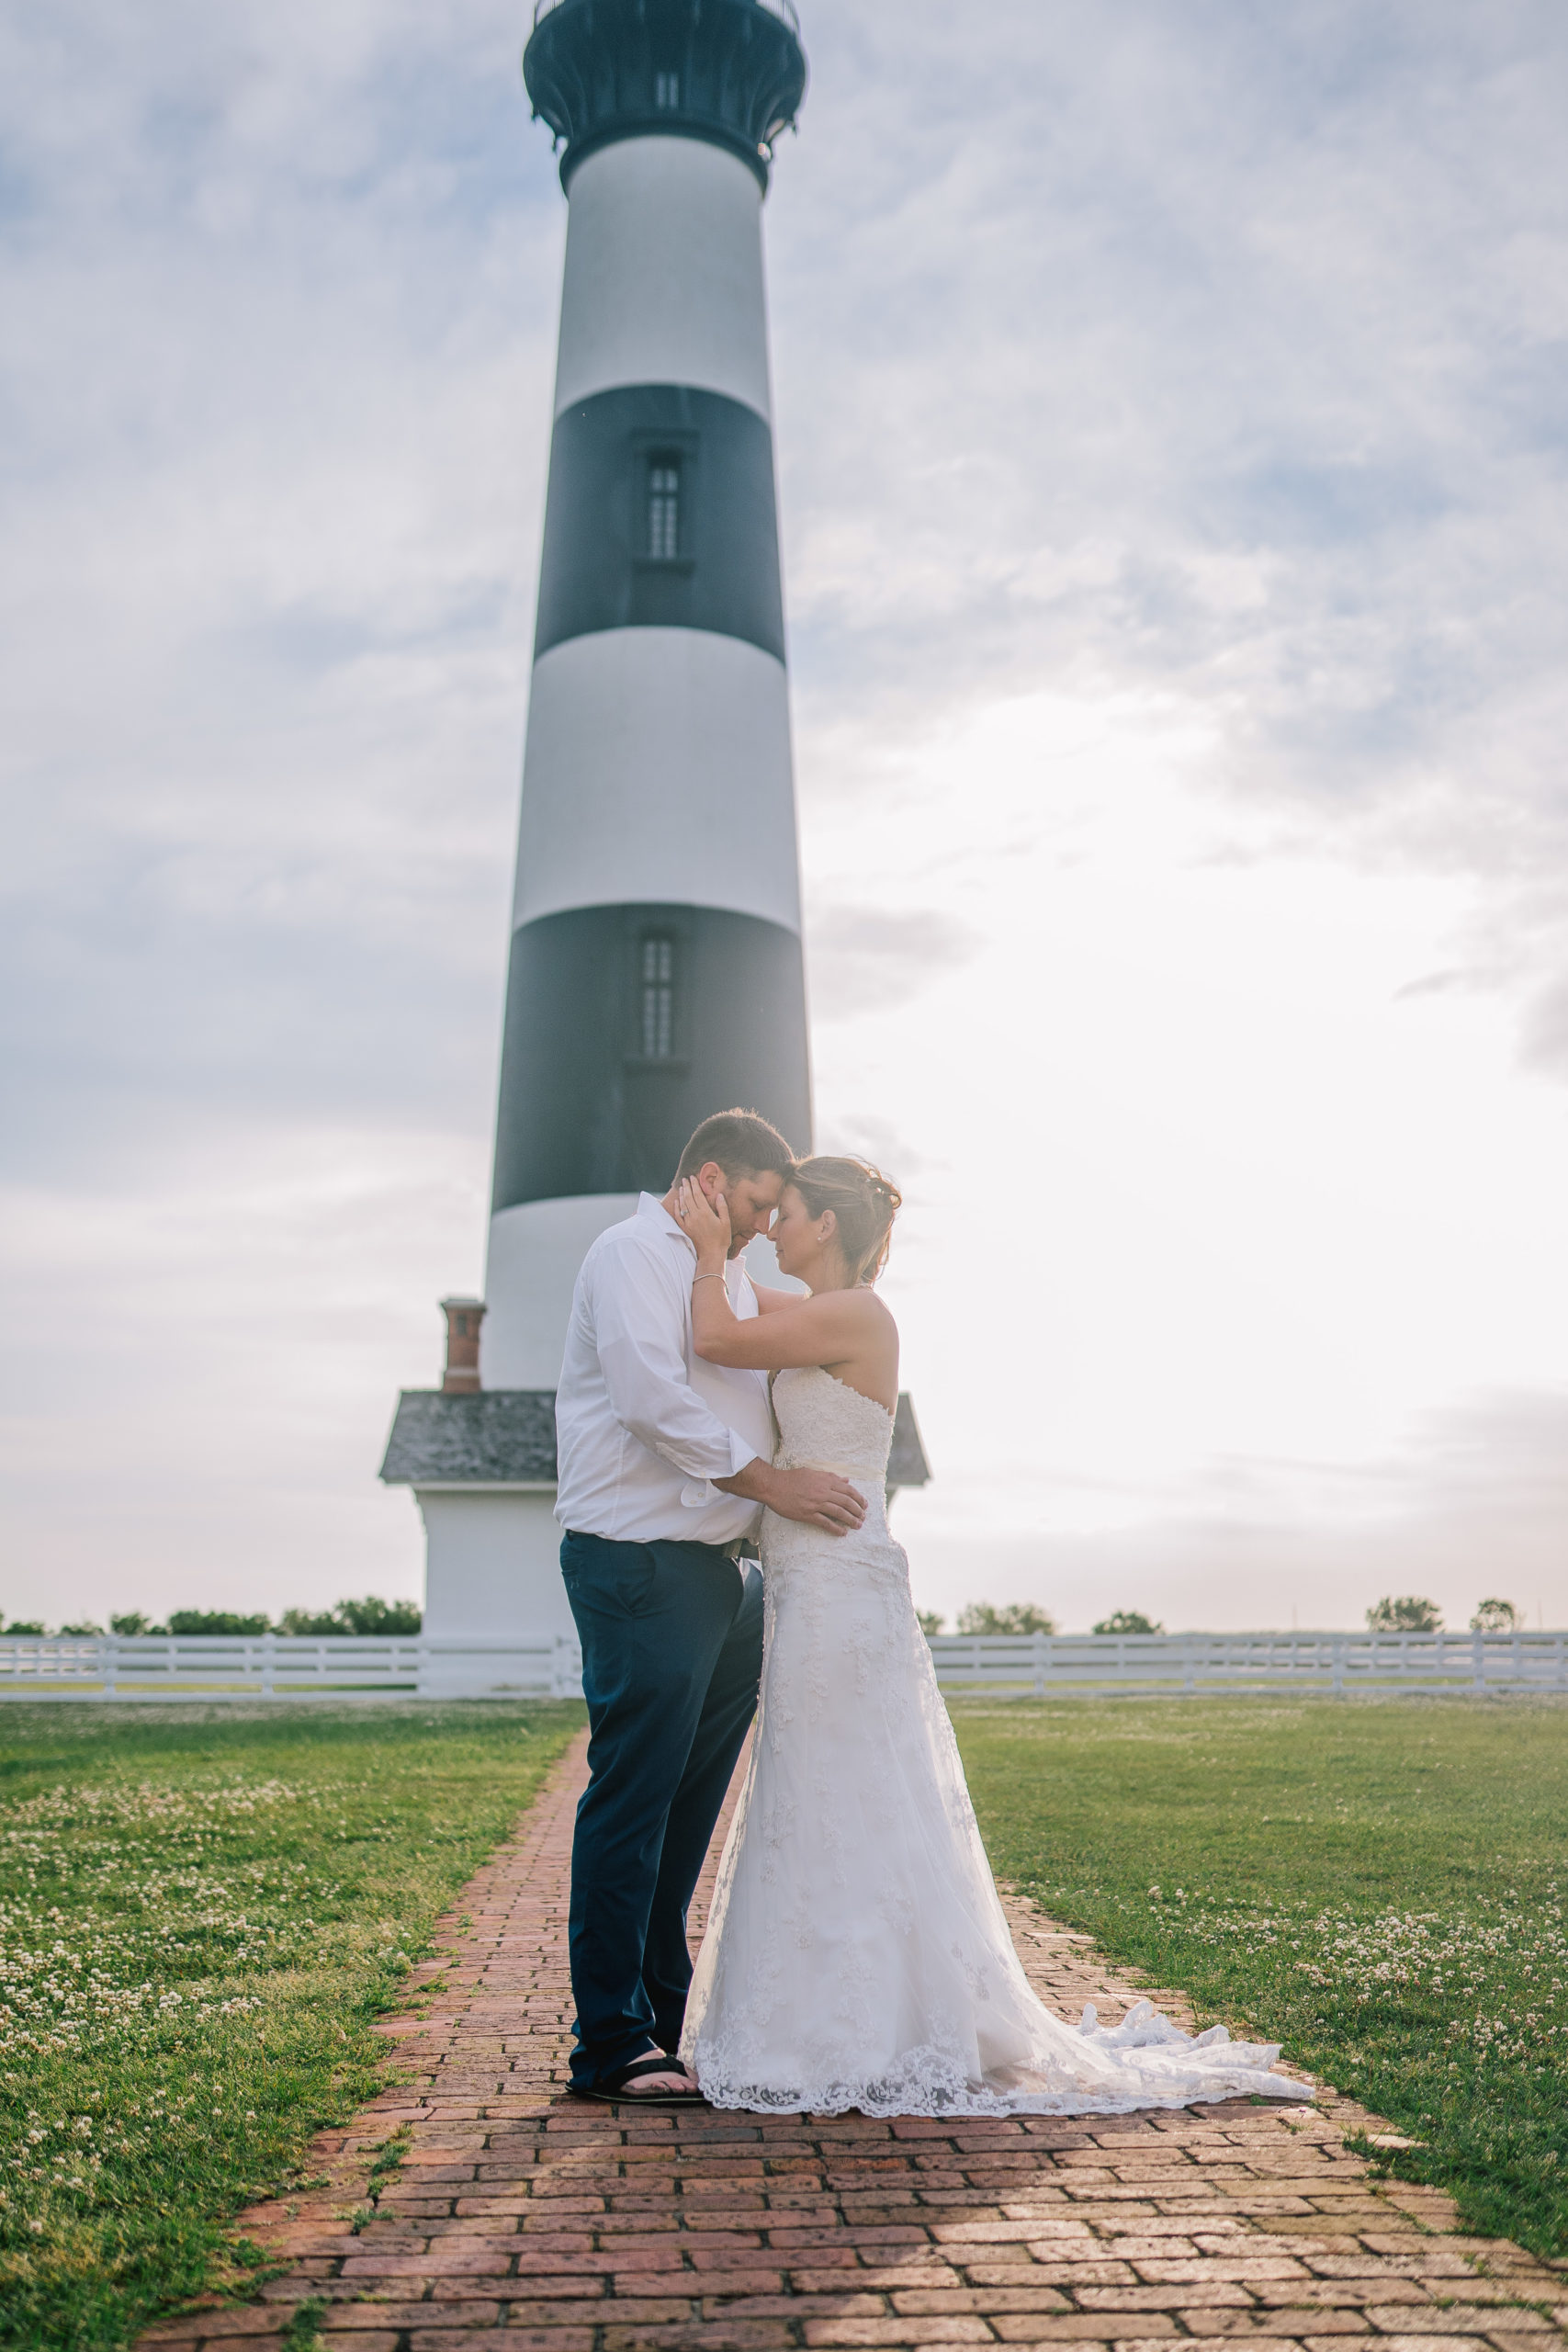 sunrise session with a light house on the beach for a wedding day shoot